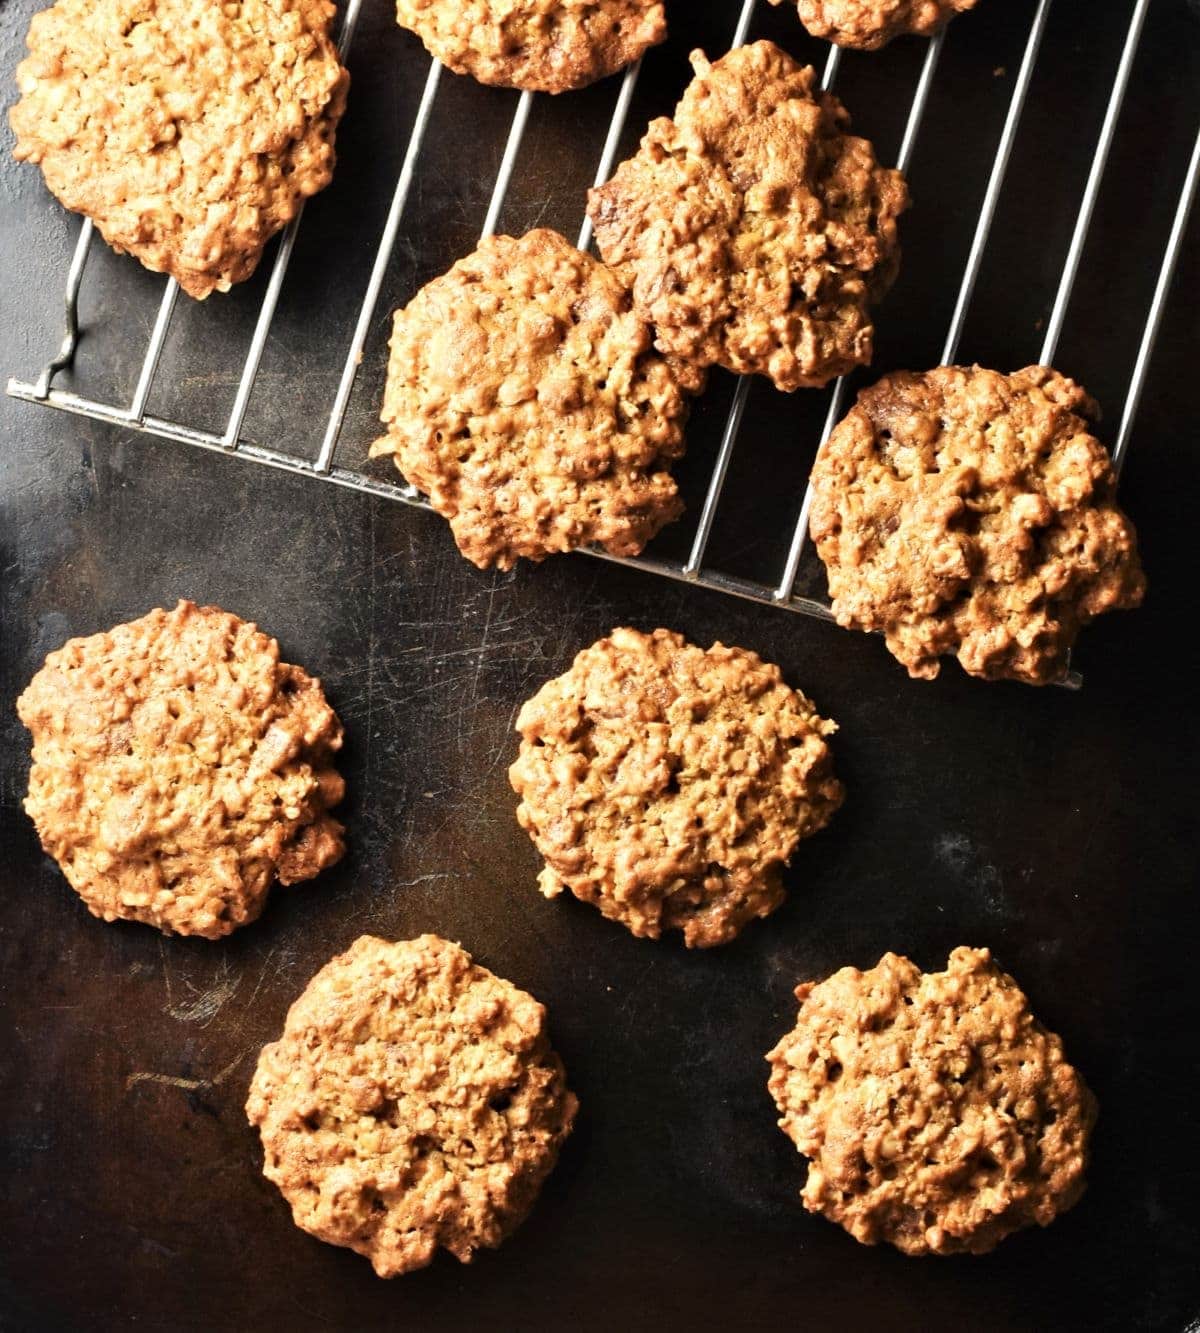 Healthy peanut butter oatmeal cookies on top of black tray and rack.